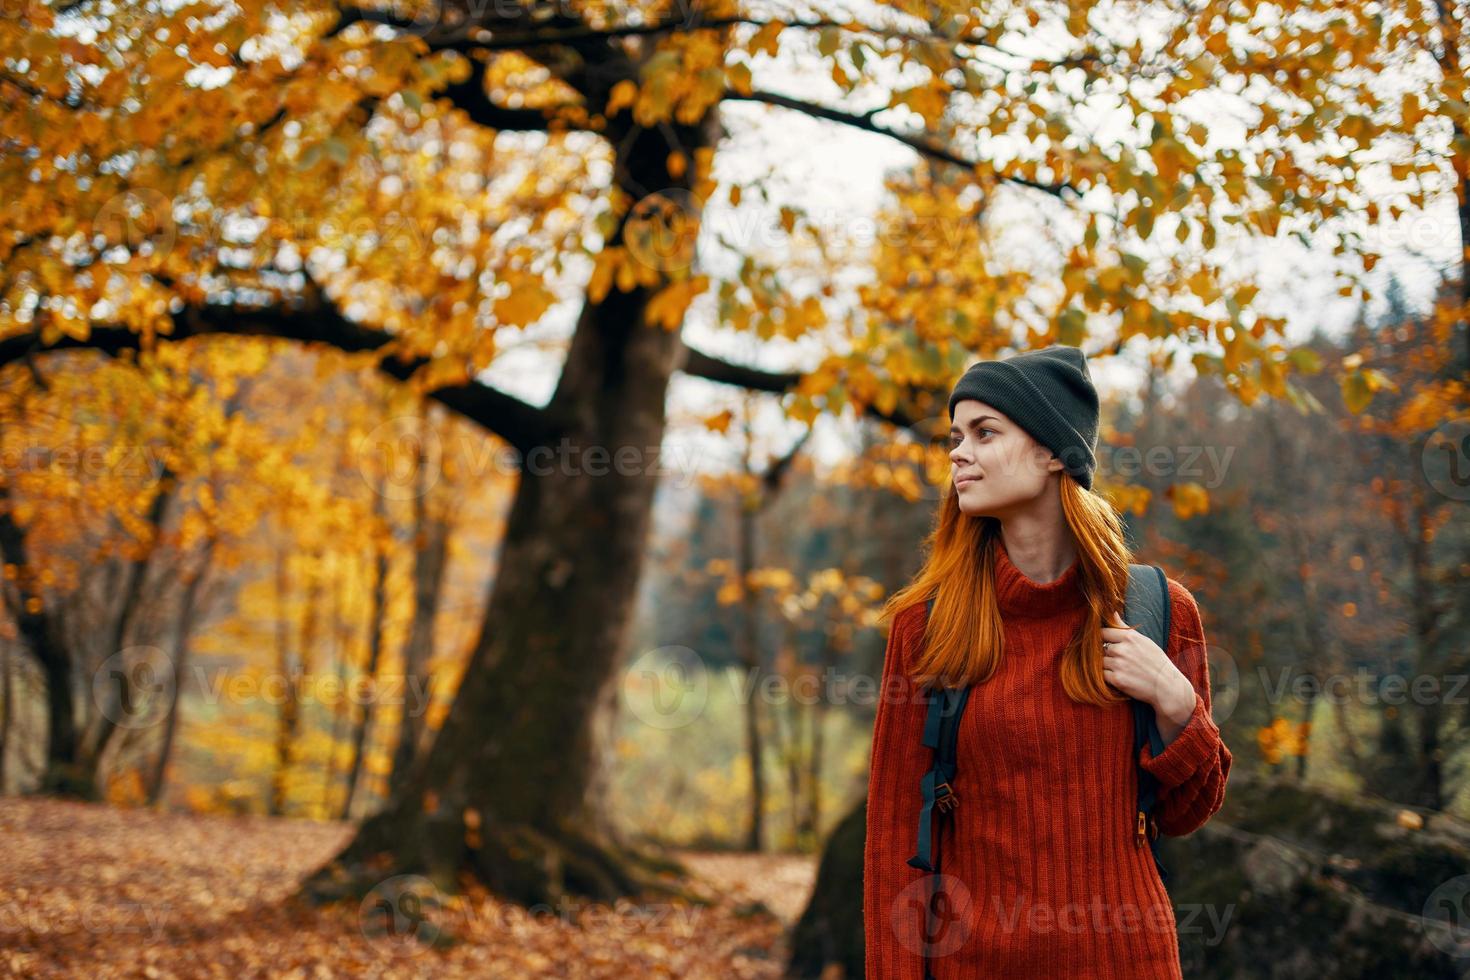 woman in a sweater walks in the park in autumn nature landscape fresh air Model backpack photo